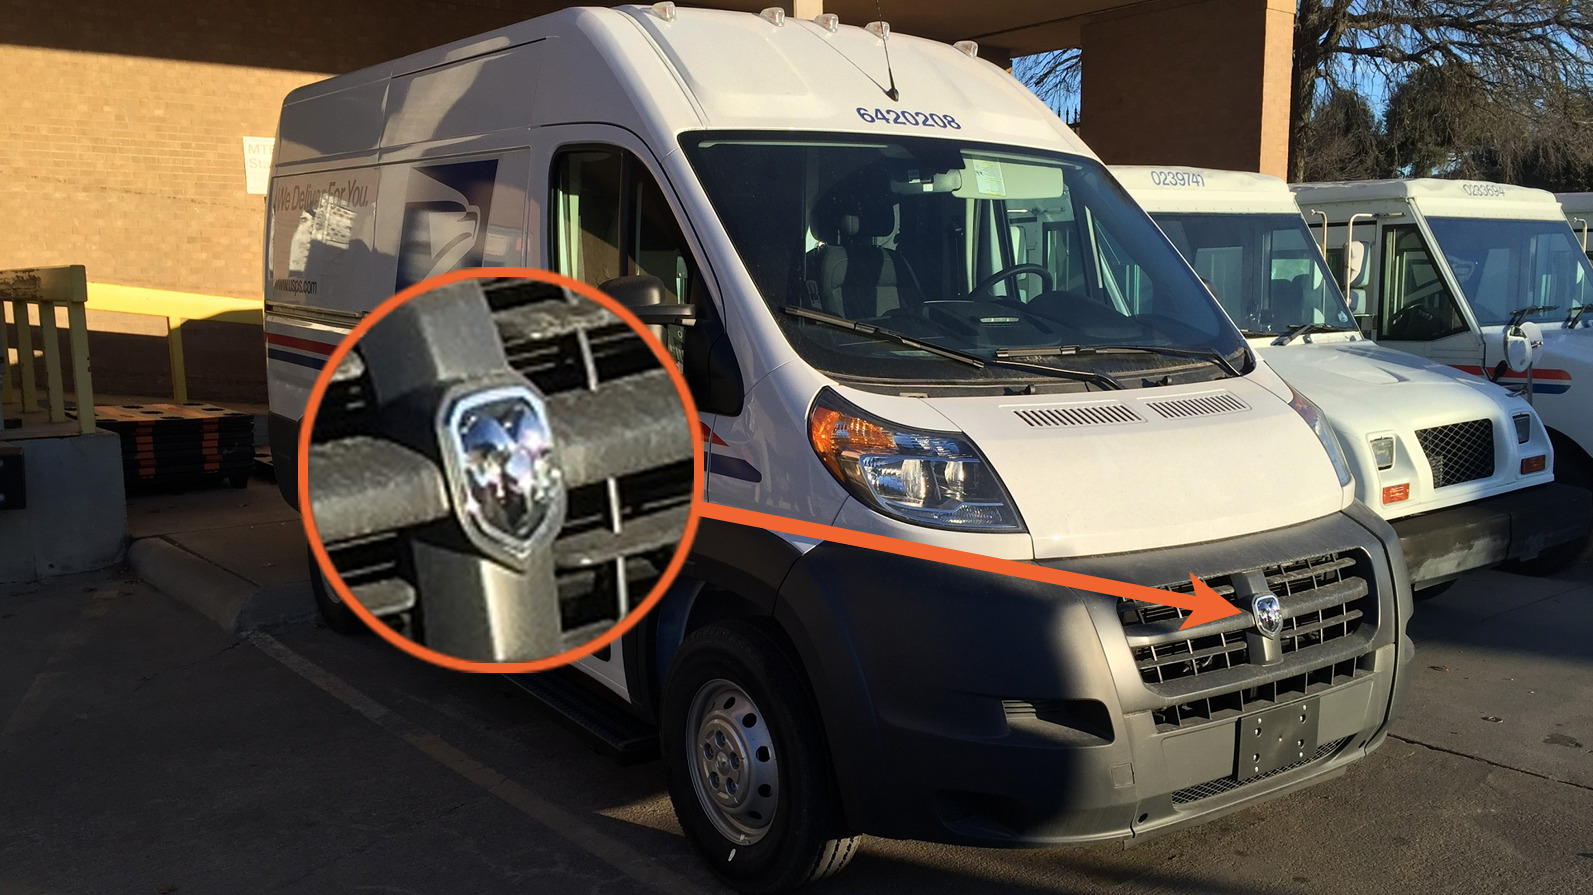 The Real Reason Behind The U.S. Post Office Removing Mercedes Badges From Its New Vans